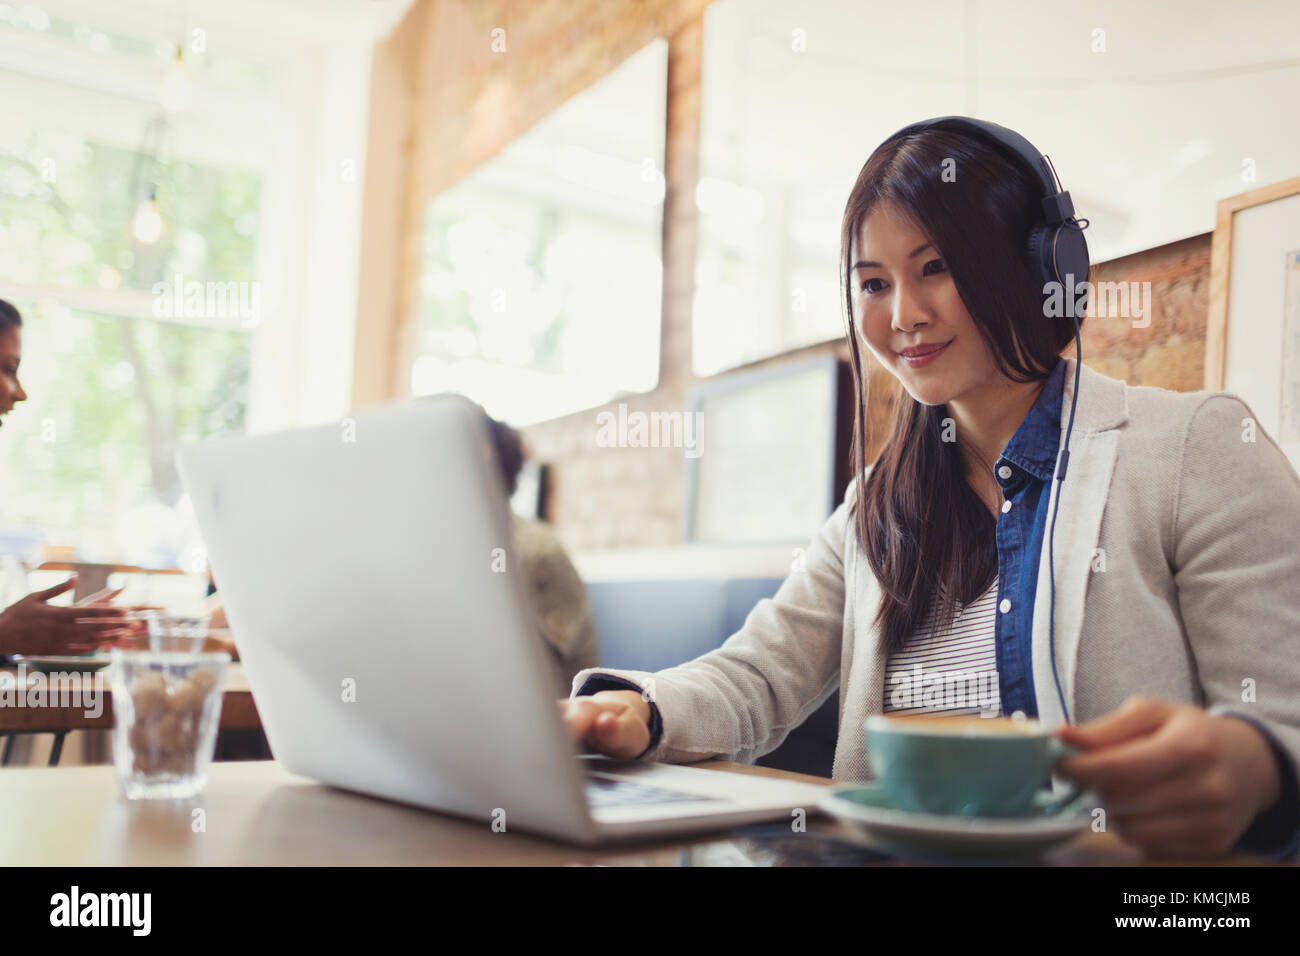 Smiling young woman listening to music with headphones at laptop and drinking coffee in cafe Stock Photo